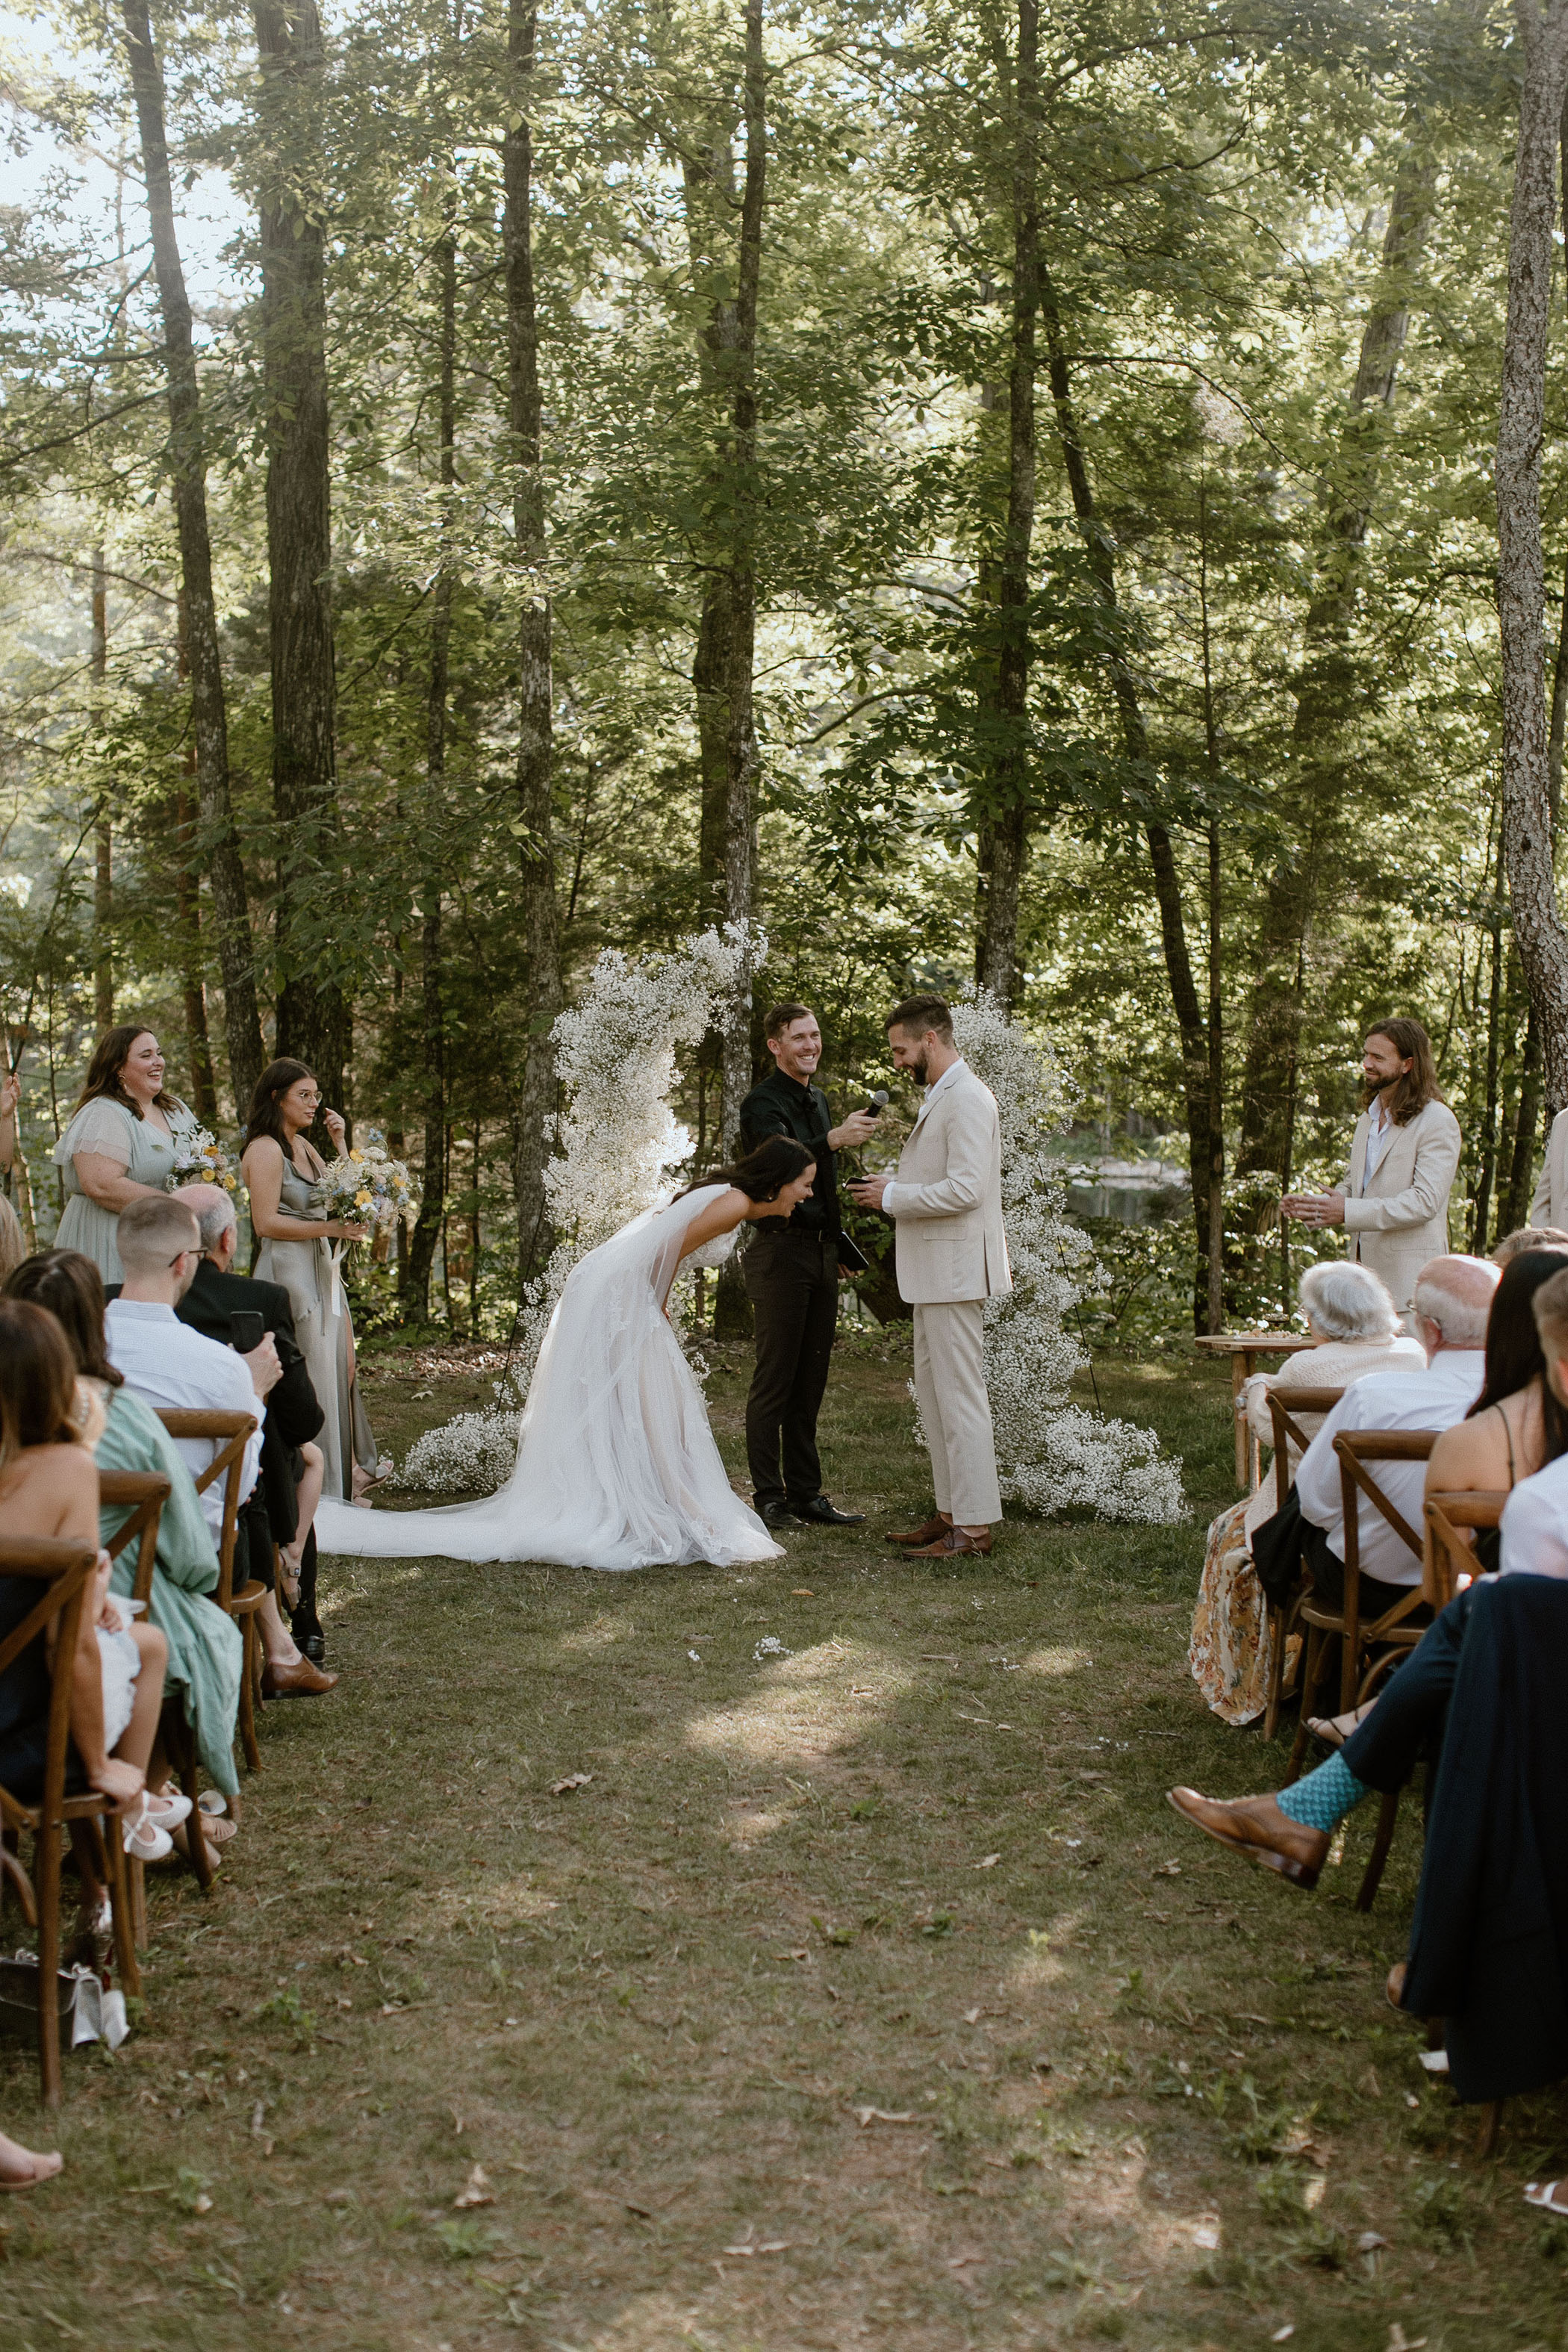 Bounce House Wedding in the Forest